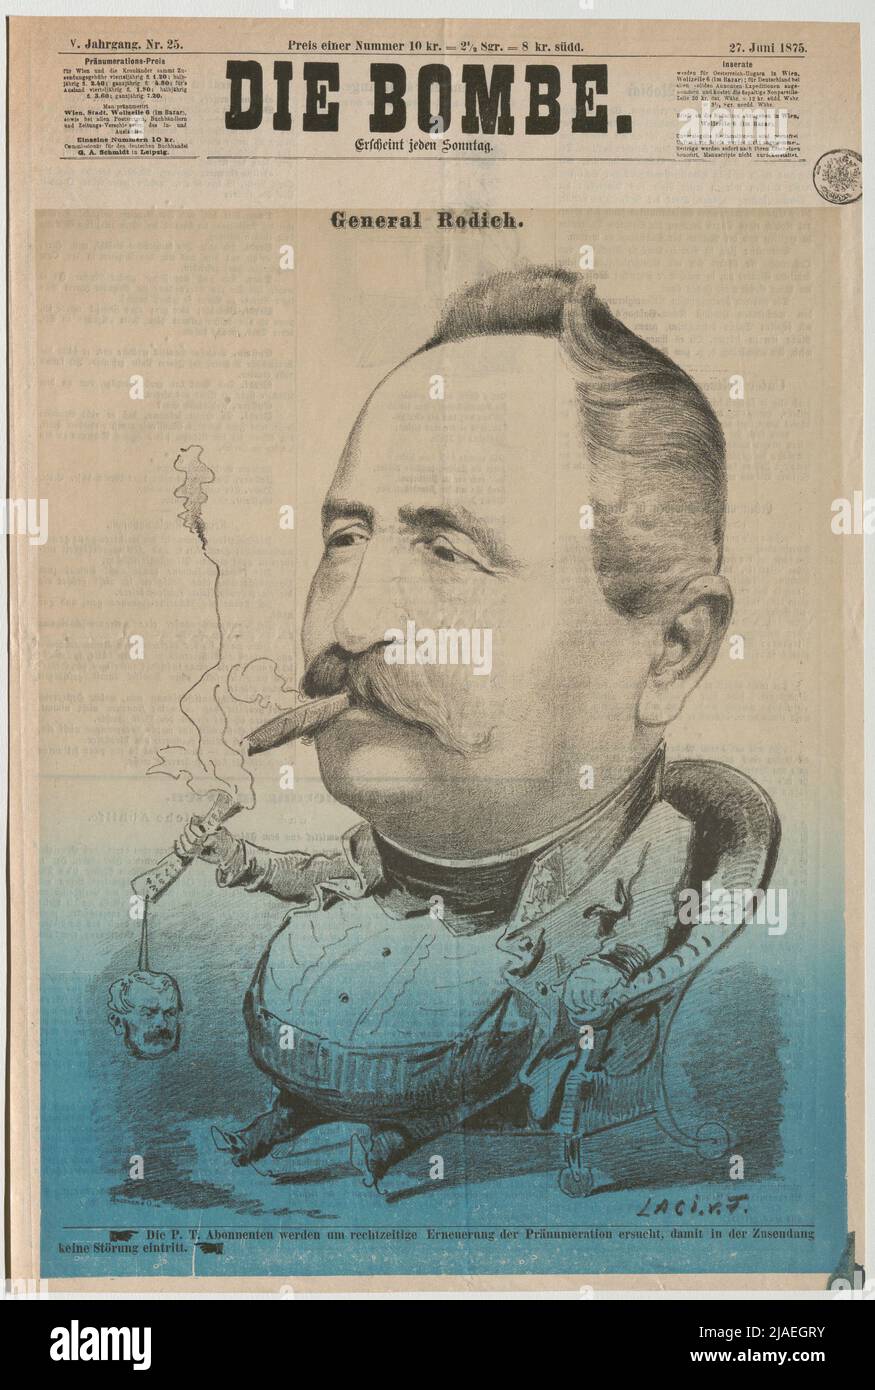 General Rodich. '. General Gabriel Freiherr von Rodich lights up his cigar with ministerial letters (title page of' Die Bomb '). László frecskay (1844-1916), Caricaturist, C. Angerer & Göschl, Realization Stock Photo